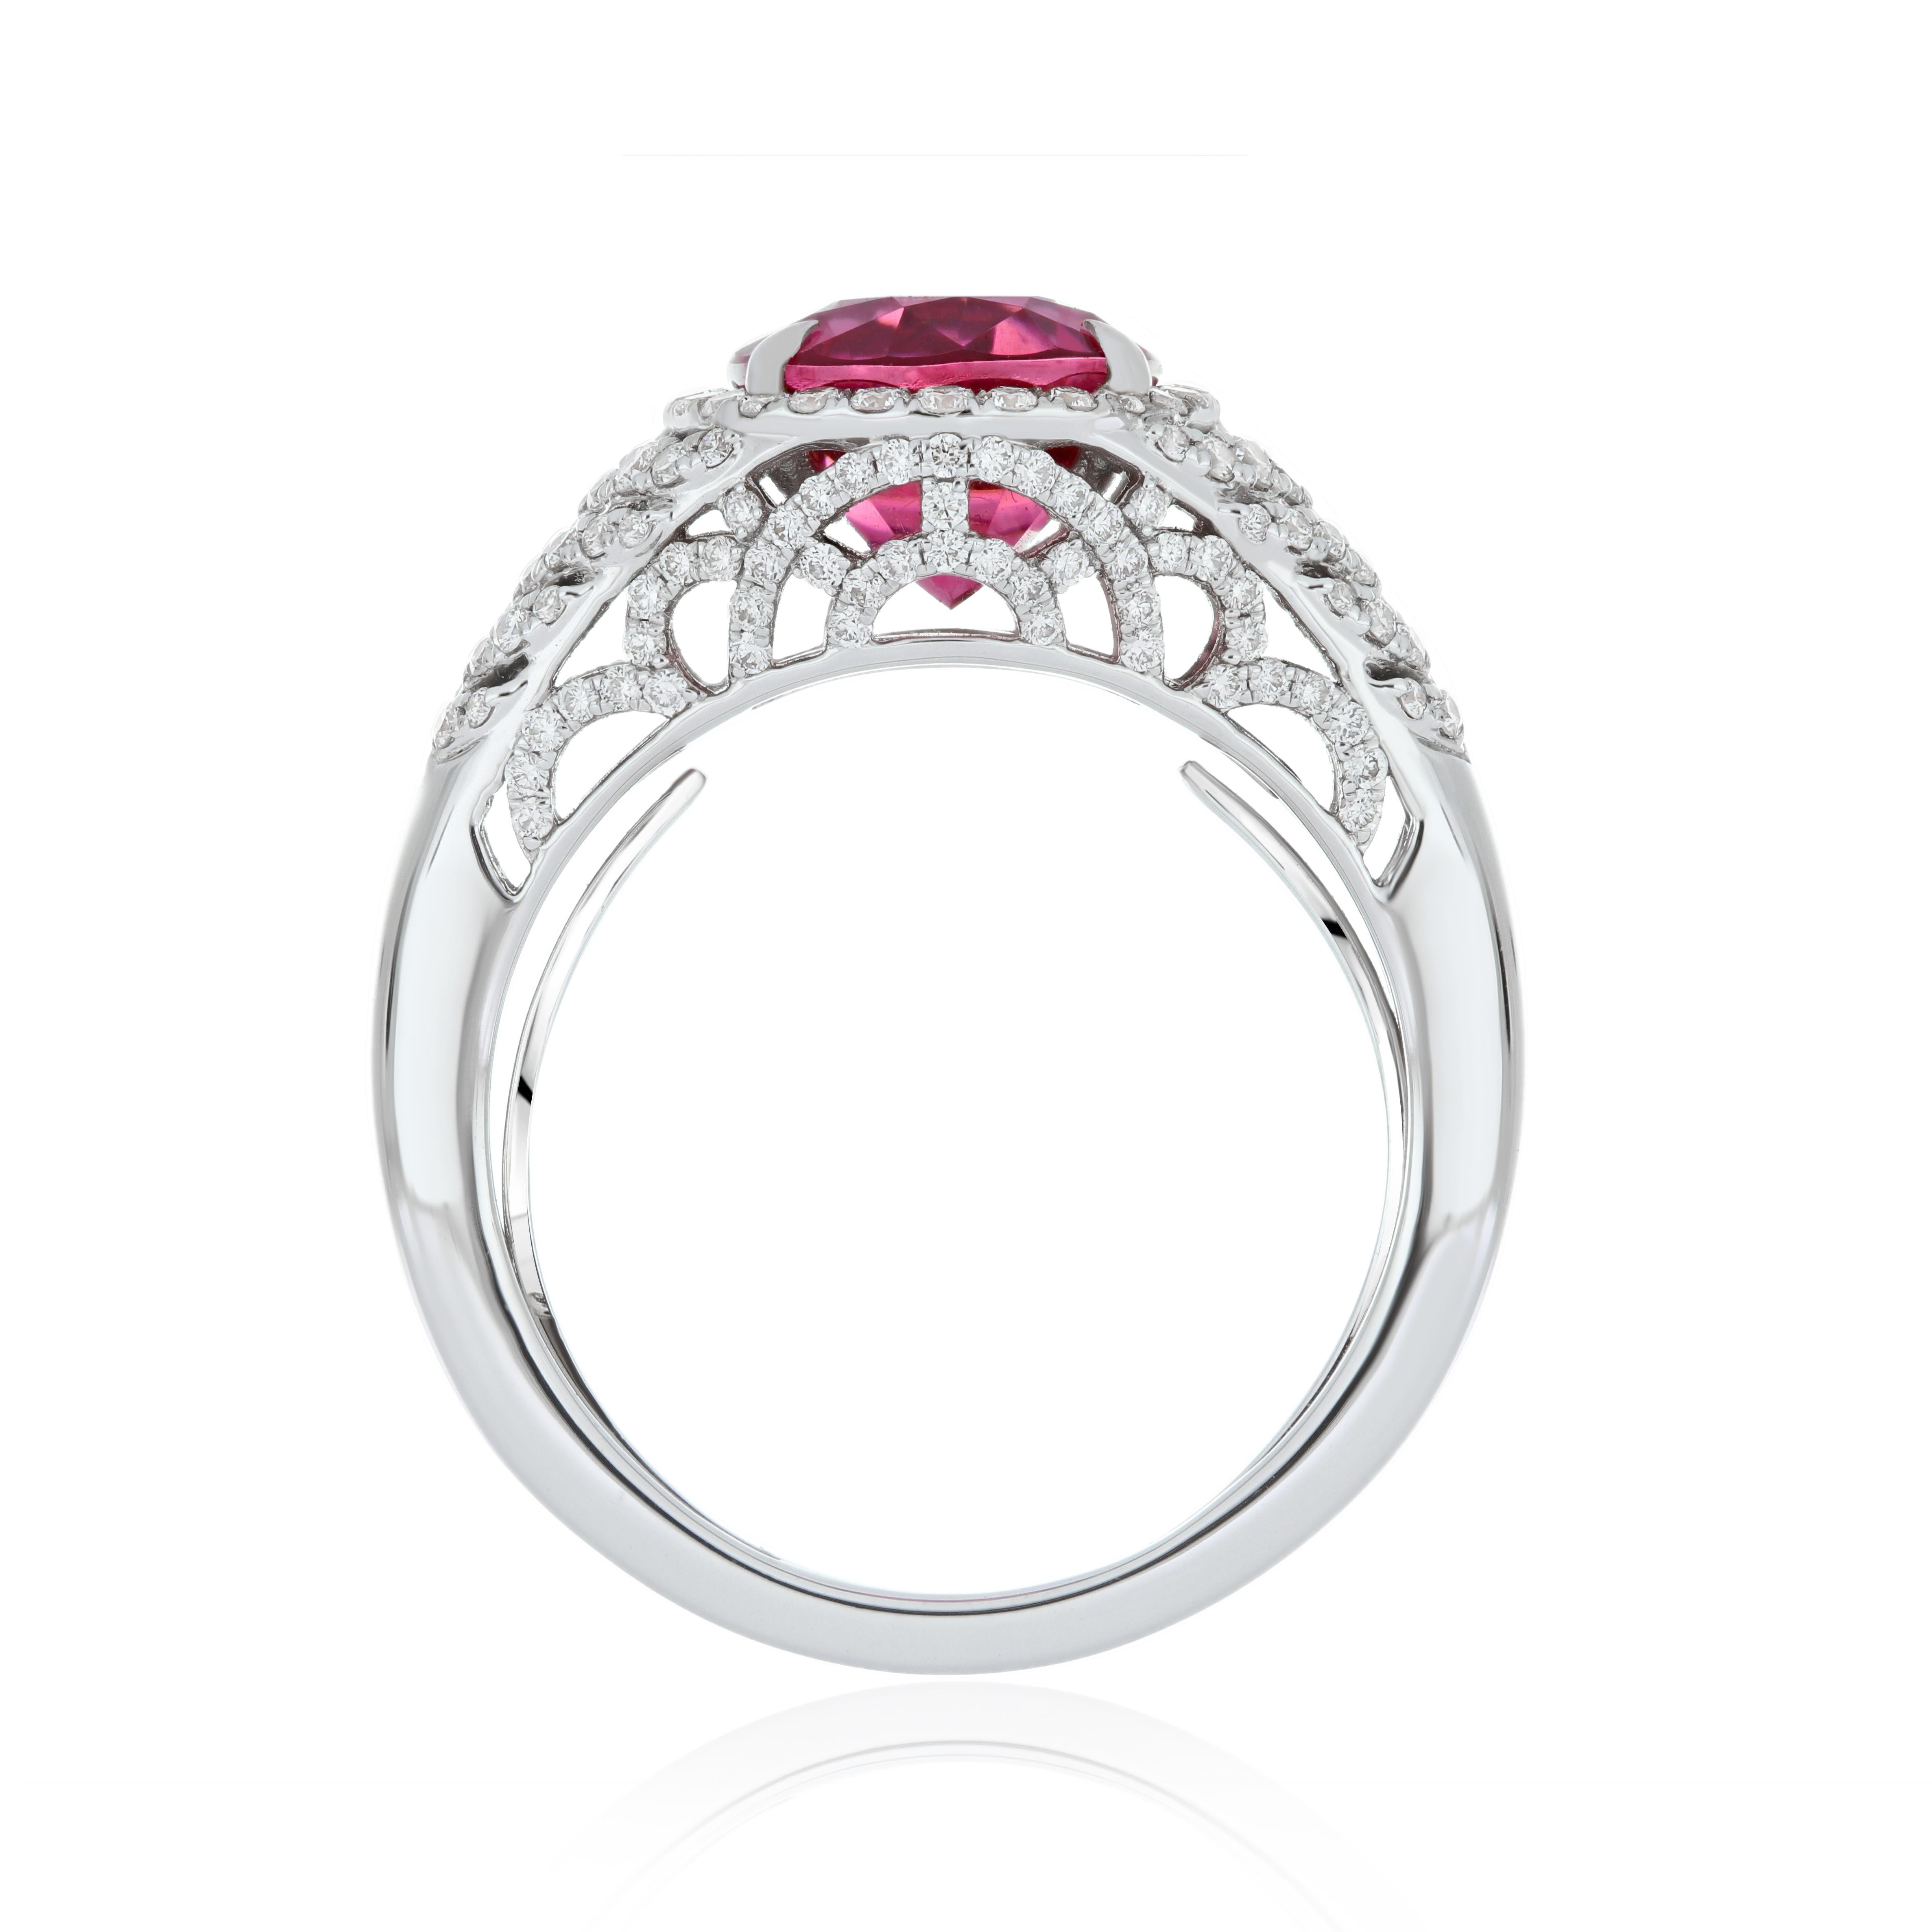 Women's 3.85 Carats Rubellite and Diamond Studded Ring in 18K White Gold Ring For Sale